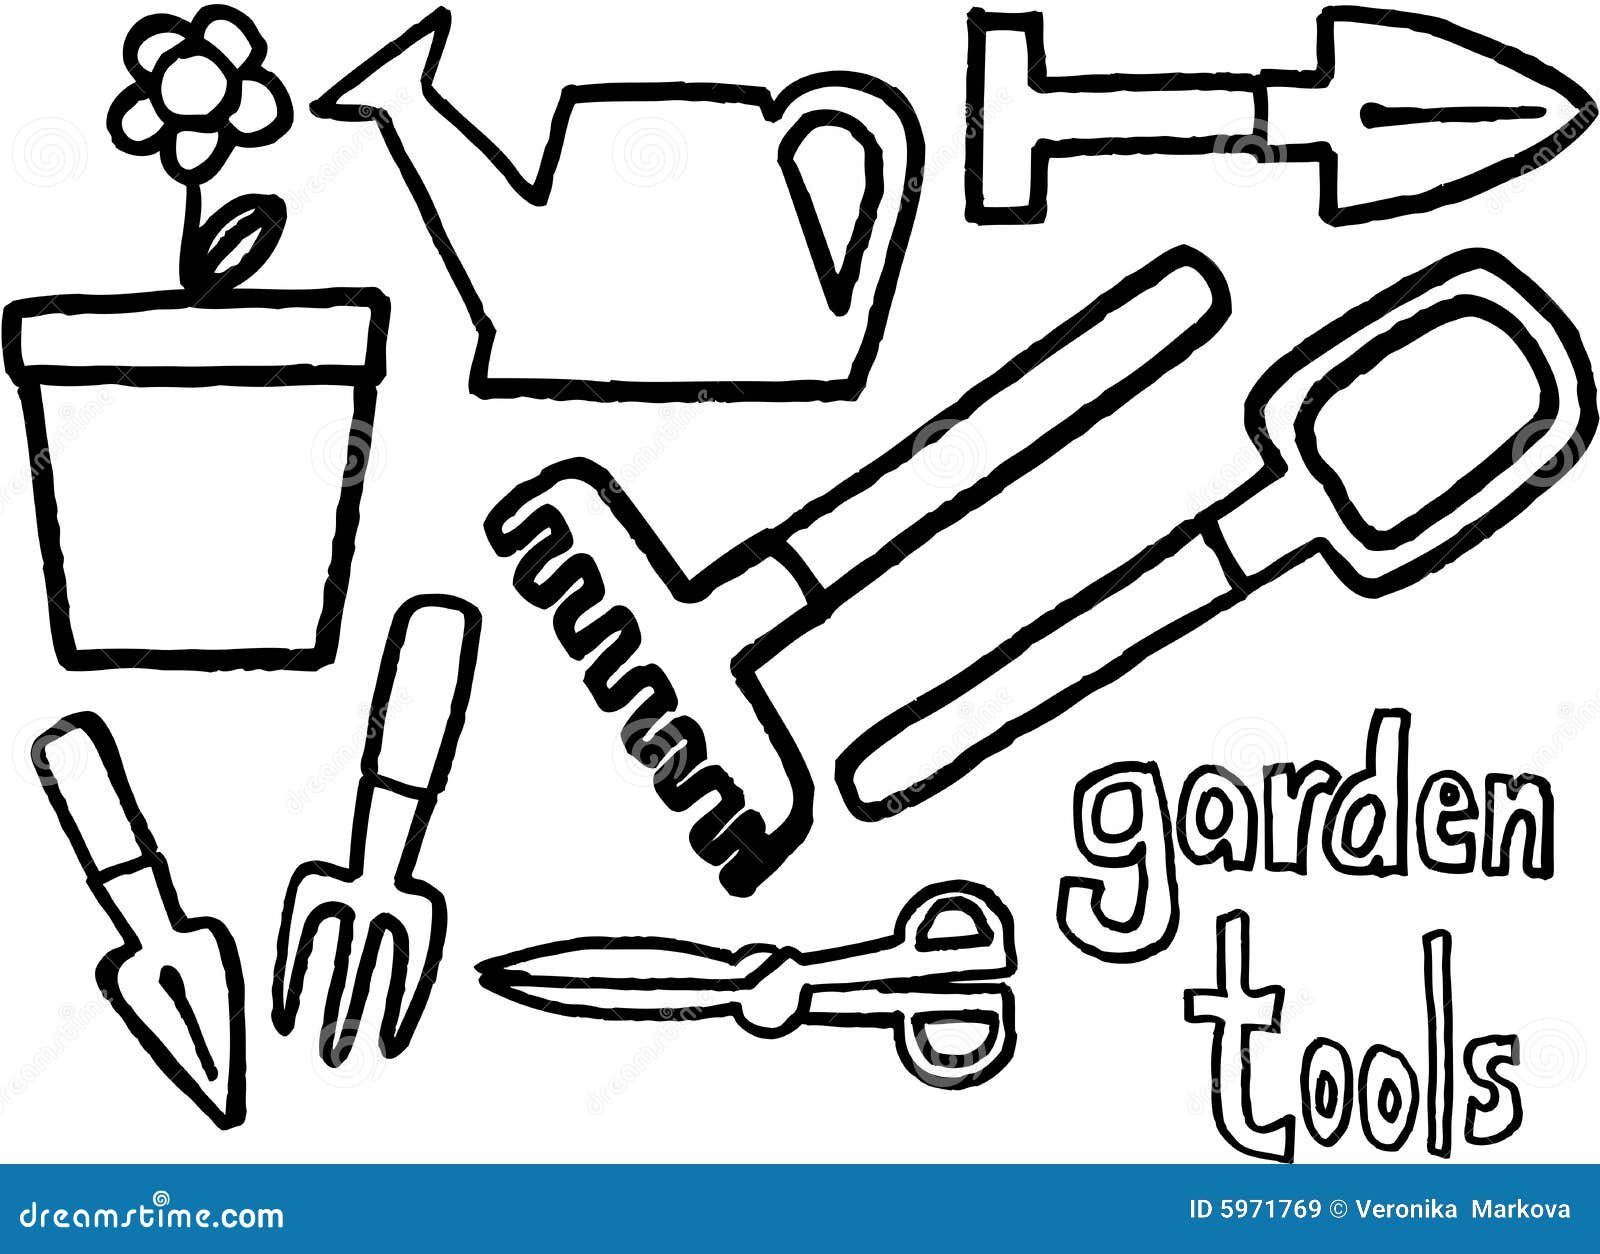 garden tools coloring pages - photo #2